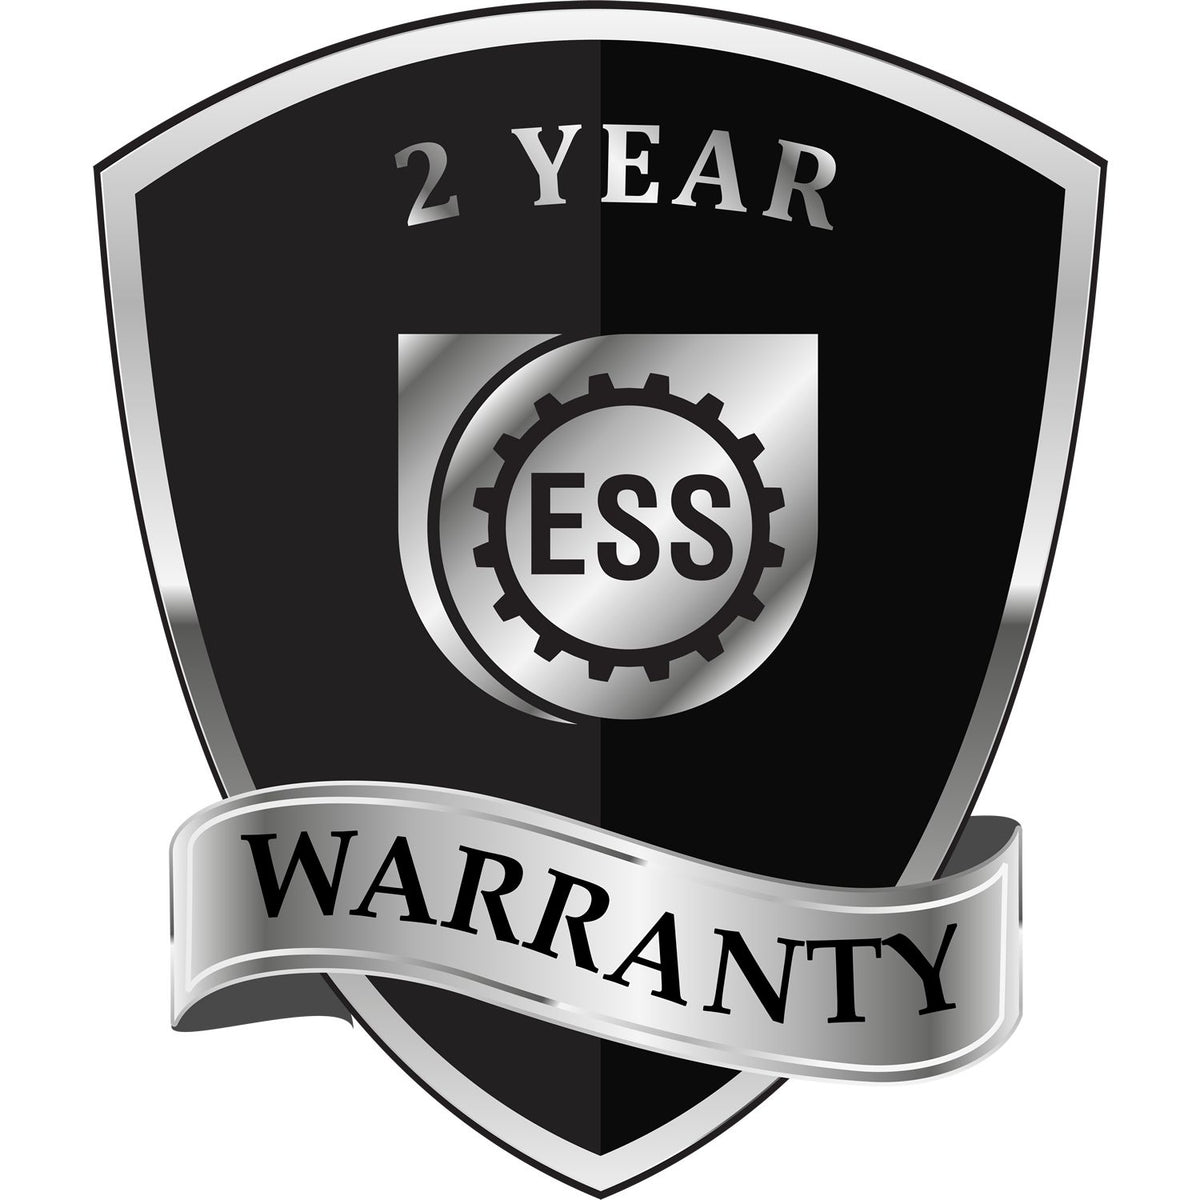 A badge or emblem showing a warranty icon for the State of Tennessee Extended Long Reach Engineer Seal